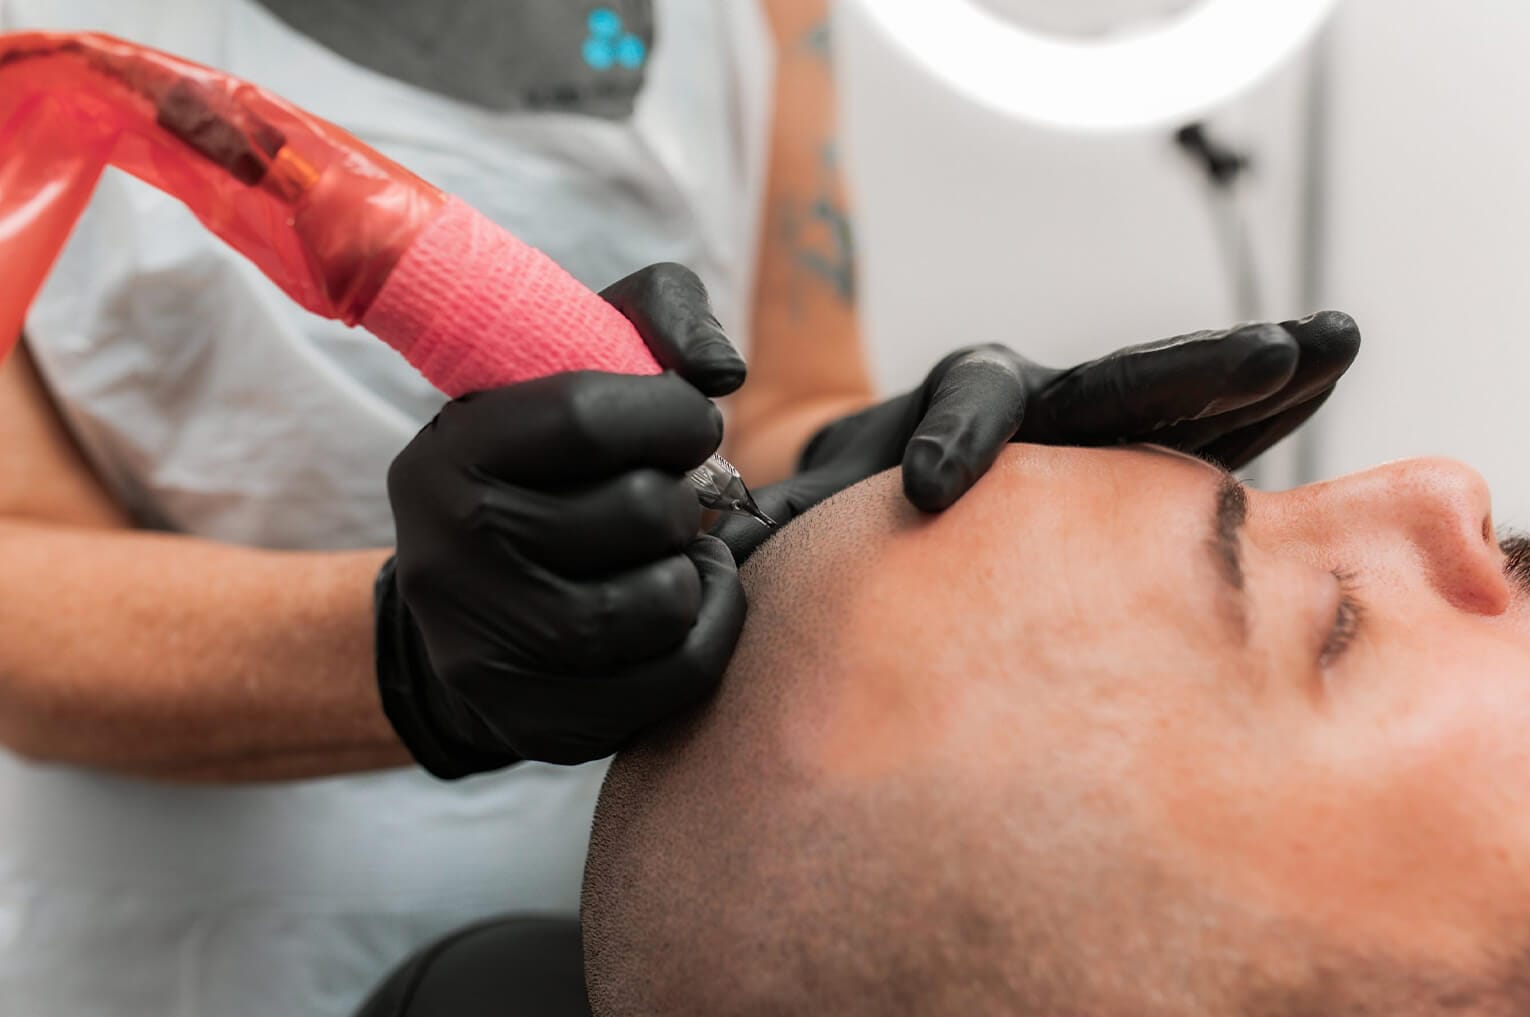 Hair Tattoos: What’s All the Buzz on This Growing Trend?